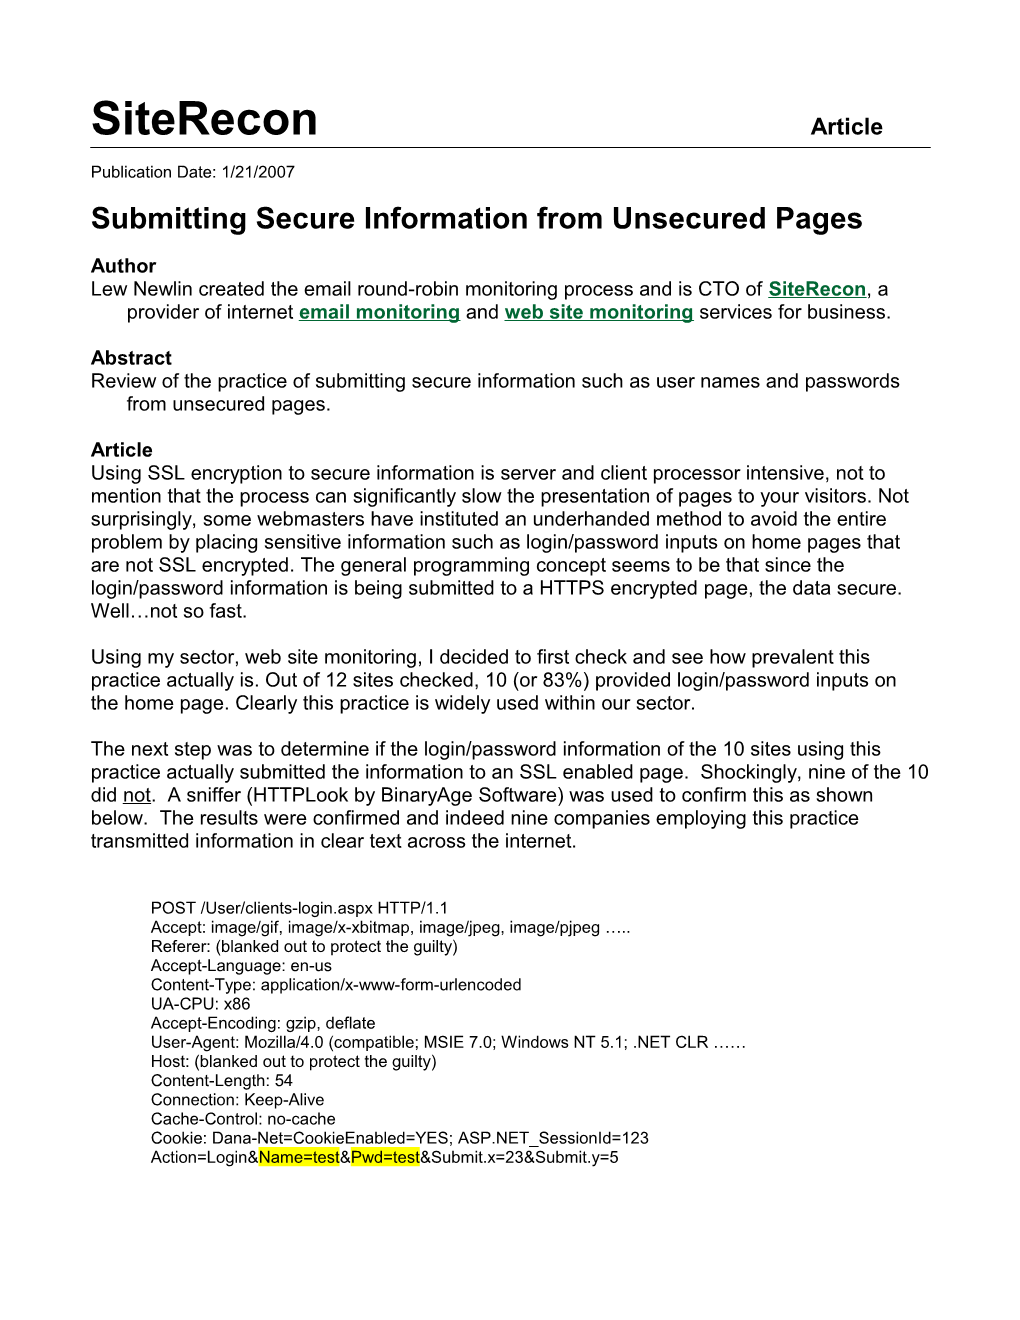 Submitting Secure Information from Unsecured Pages